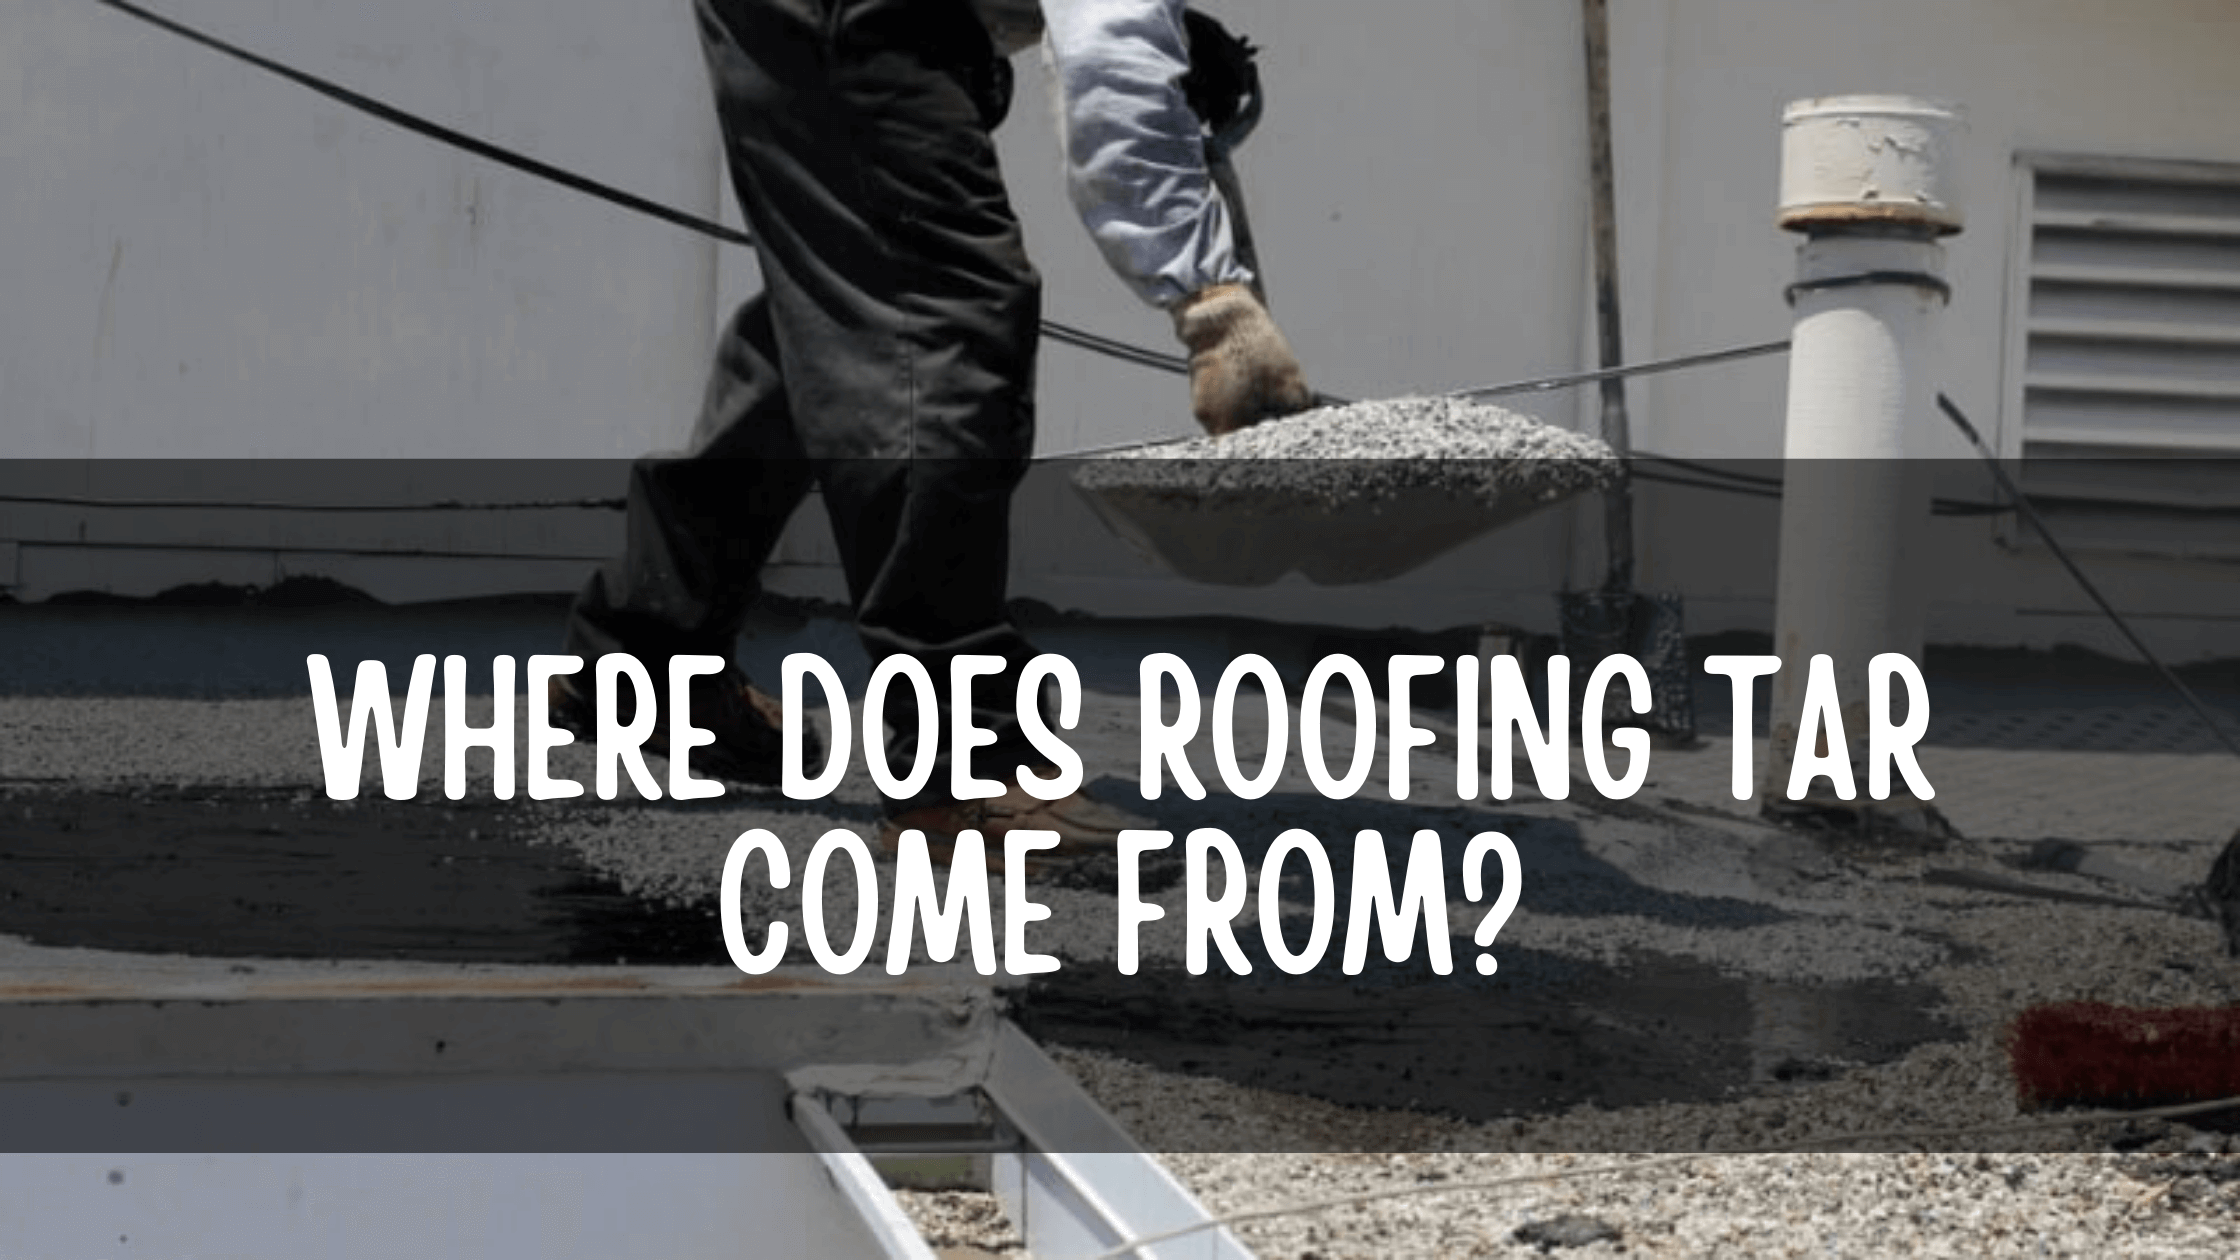 Where does roofing tar come from